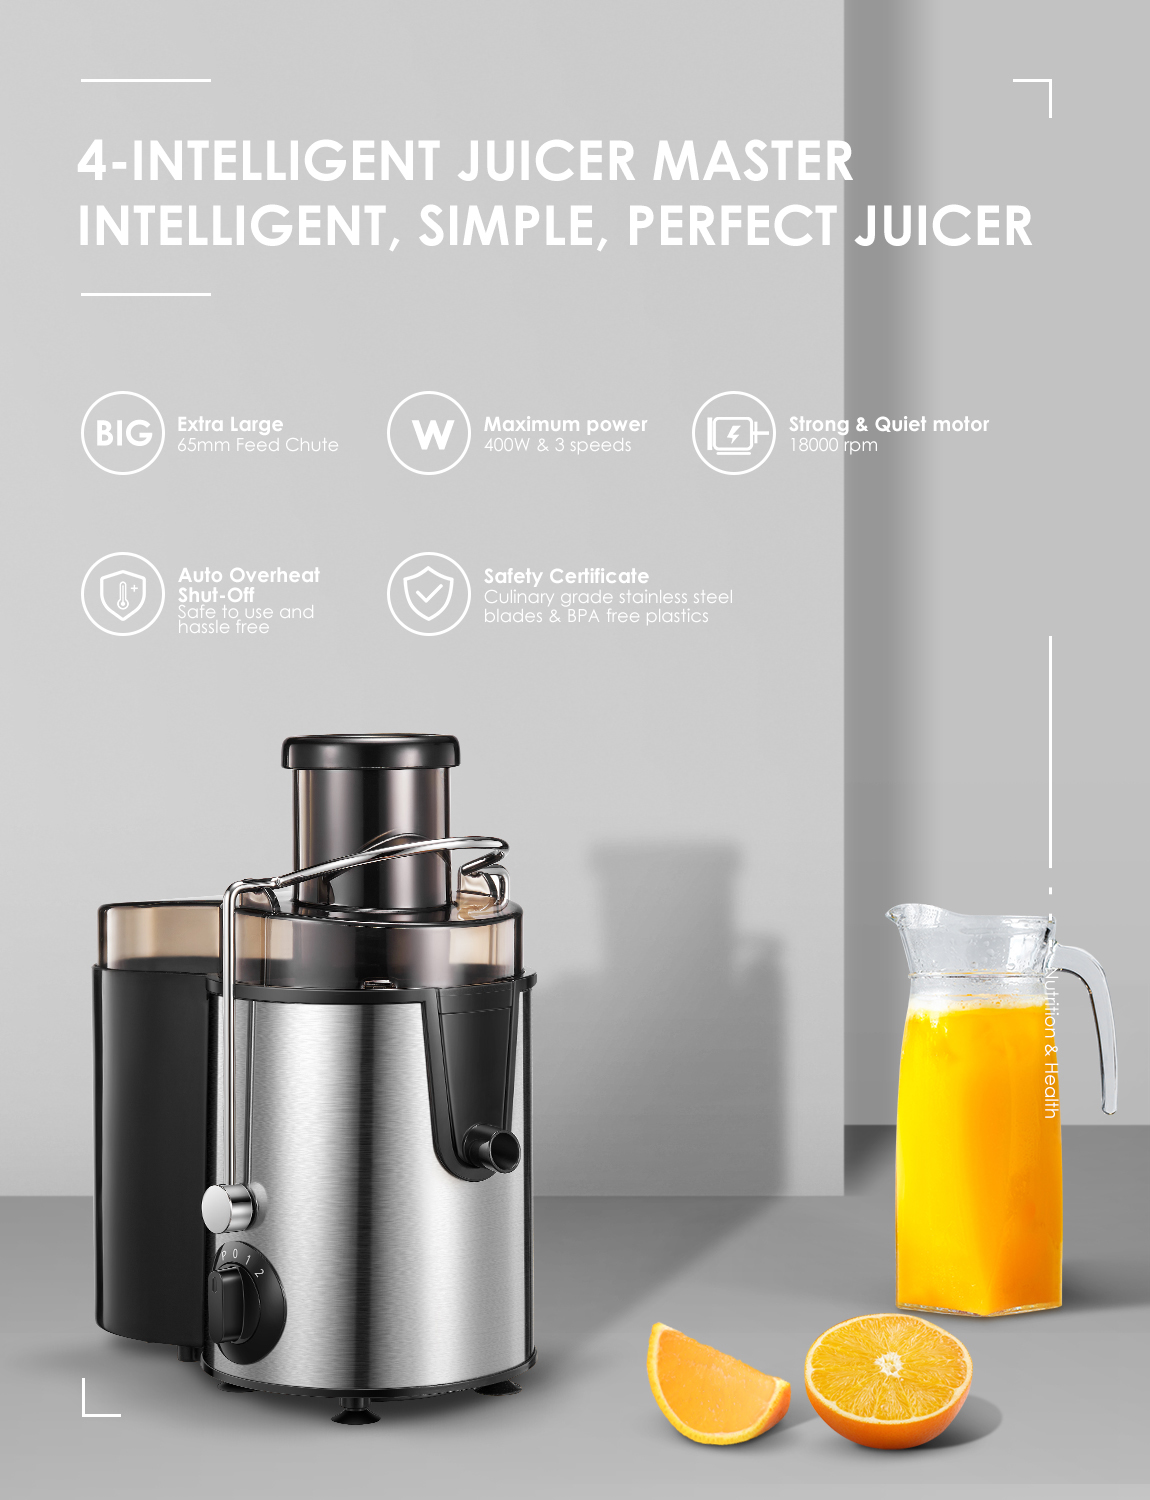 Juicer Centrifugal Juicer Machine Wide 3” Feed Chute Juice Extractor Easy to Clean, Fruit Juicer with Pulse Function and Multi-Speed Control, Anti-Drip, Stainless Steel BPA-Free - image 3 of 12